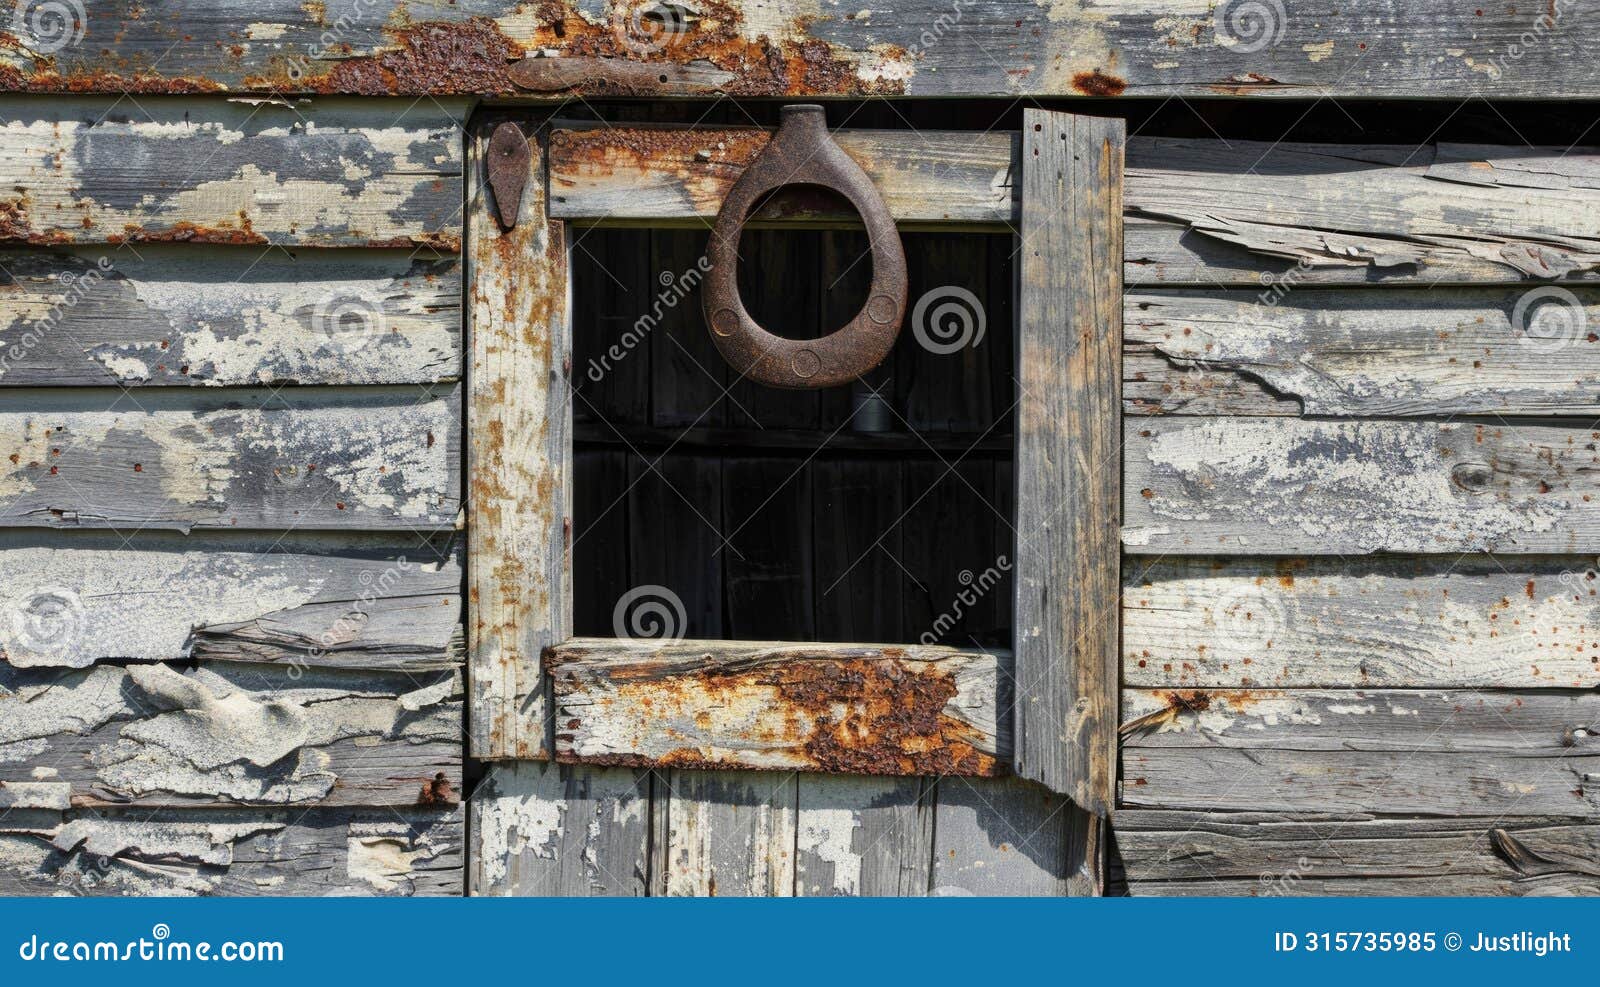 a rusted horseshoe hangs on the door of the barn its irony adding to the overwhelming sense of decay and abandonment.